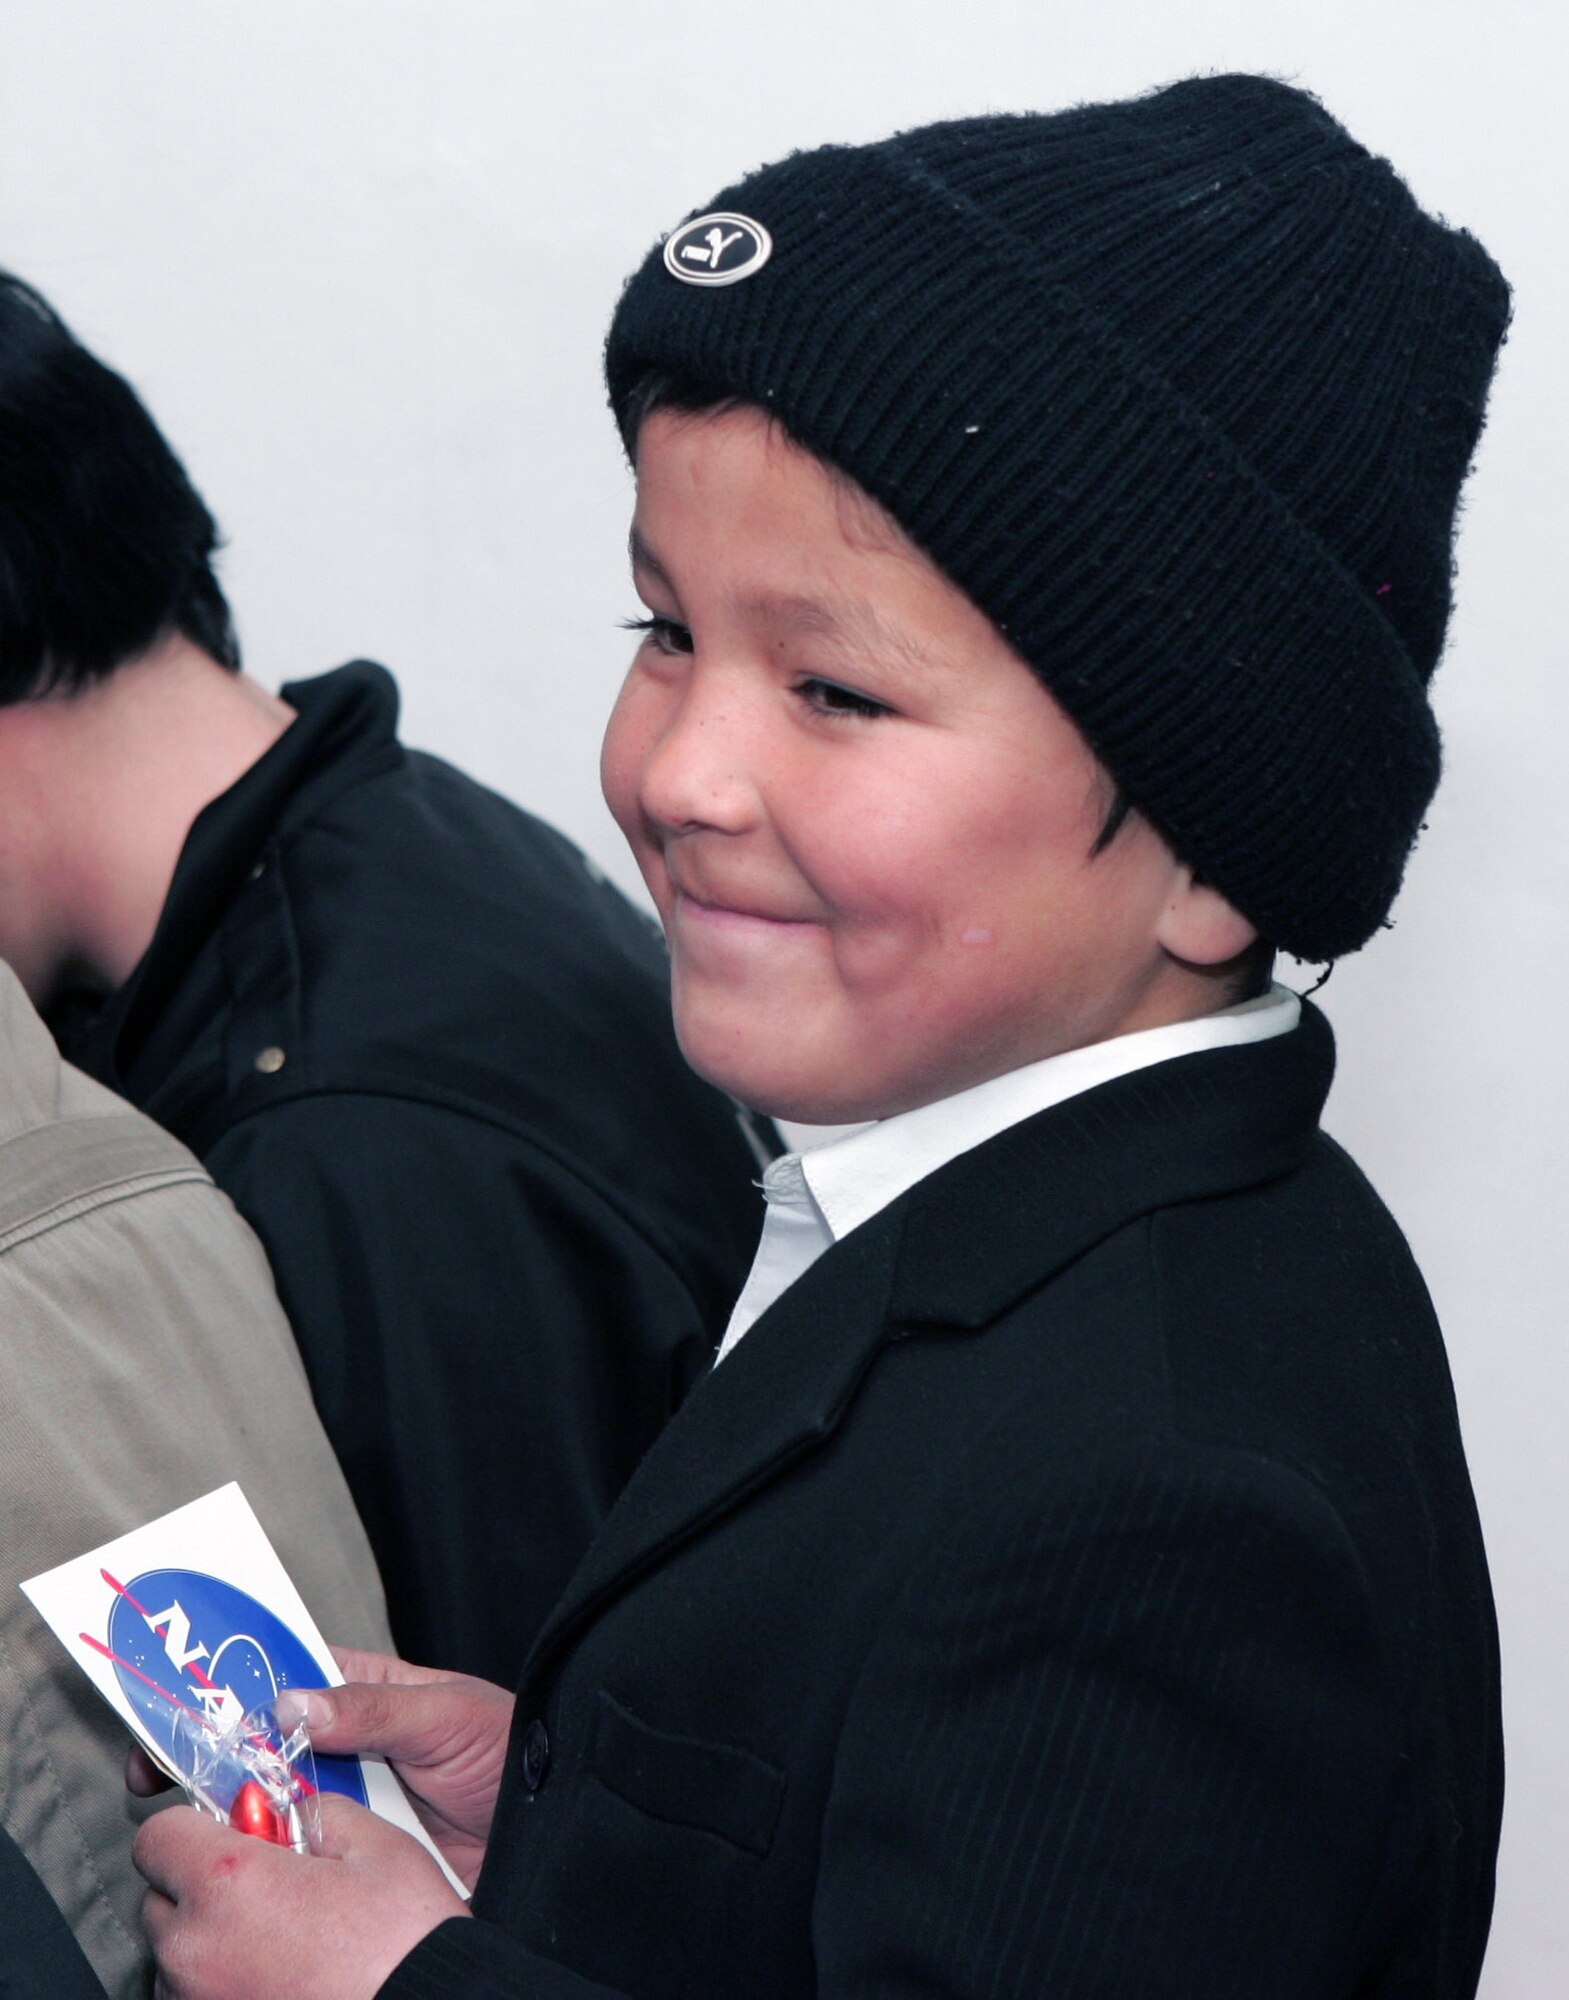 A young boy from the Jany-Pakhta village school smiles after receiving souvenirs from the Space Shuttle Endeavour STS-126 astronauts who visited his school Jan. 29 near Manas Air Base, Kyrgyzstan. The six space shuttle crewmembers spoke of the journey, which launched from Kennedy Space Center in Florida Nov. 14 and returned Nov. 30, 2008. (U.S. Air Force photo/Tech. Sgt. David Jones) 
